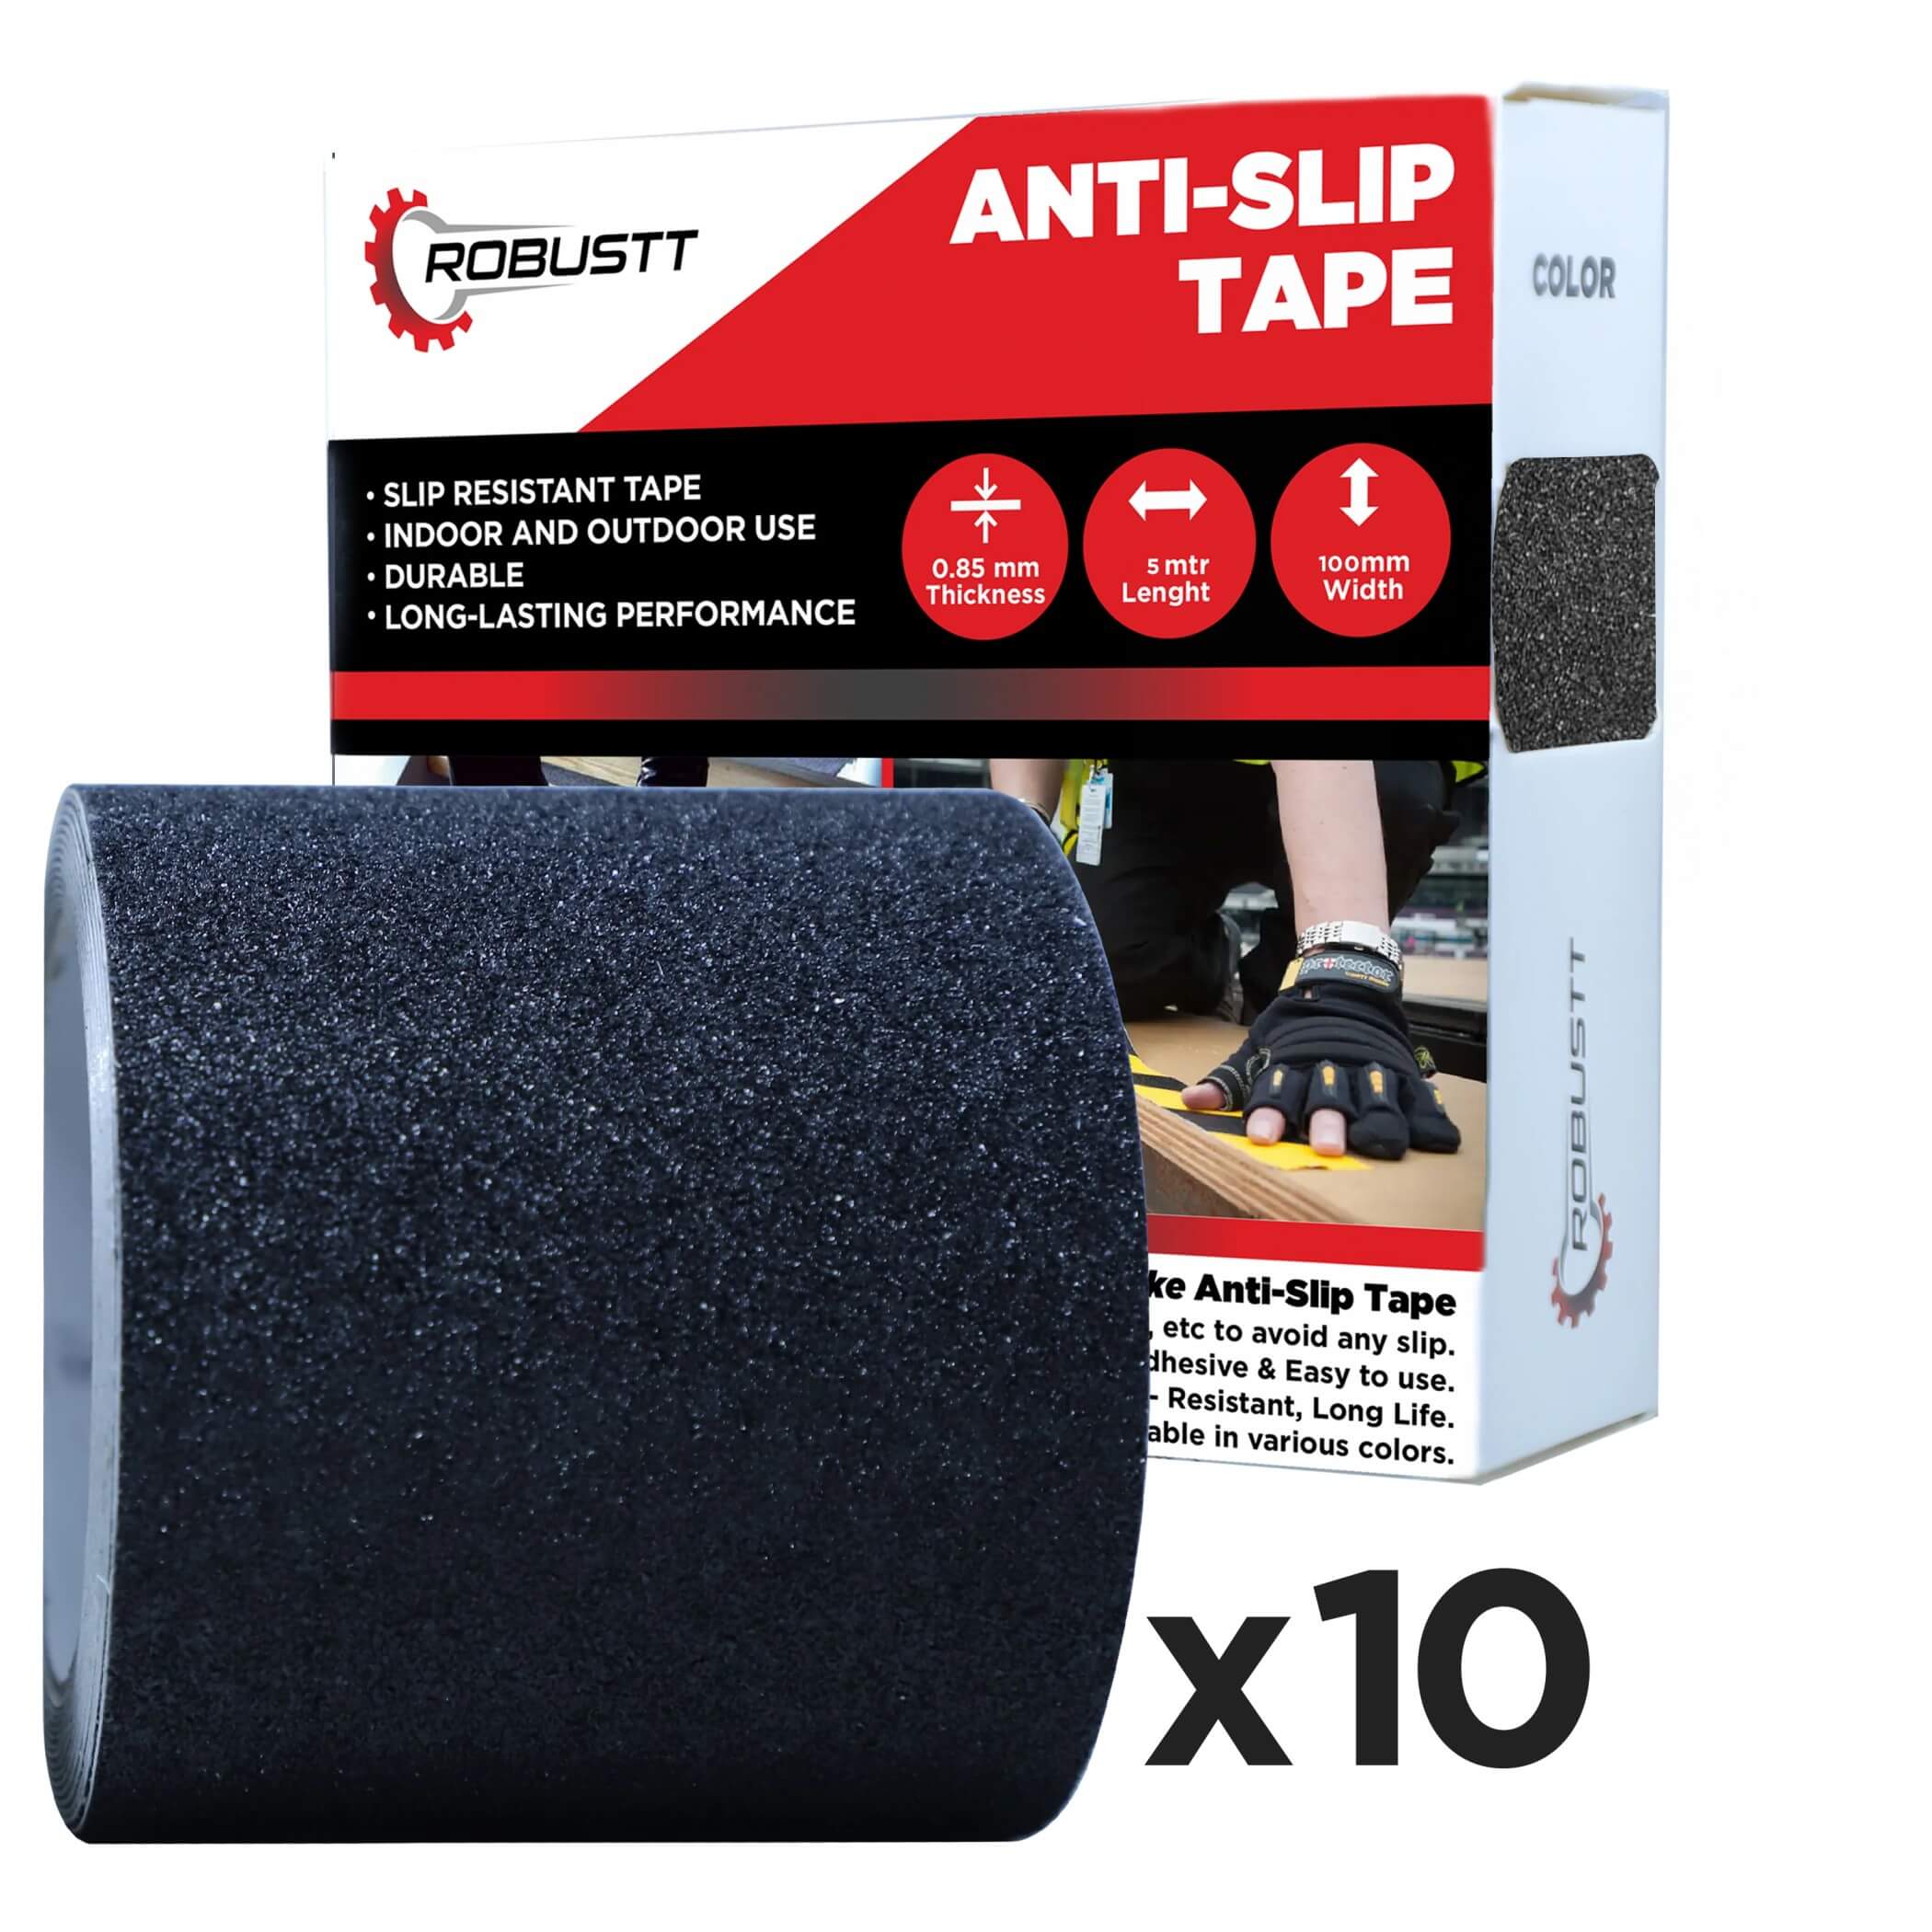 robustt-anti-skid-antislip-5mtr-guaranteed-x100mm-black-fall-resistant-with-pet-material-and-solvent-acrylic-adhesive-tape-pack-of-10